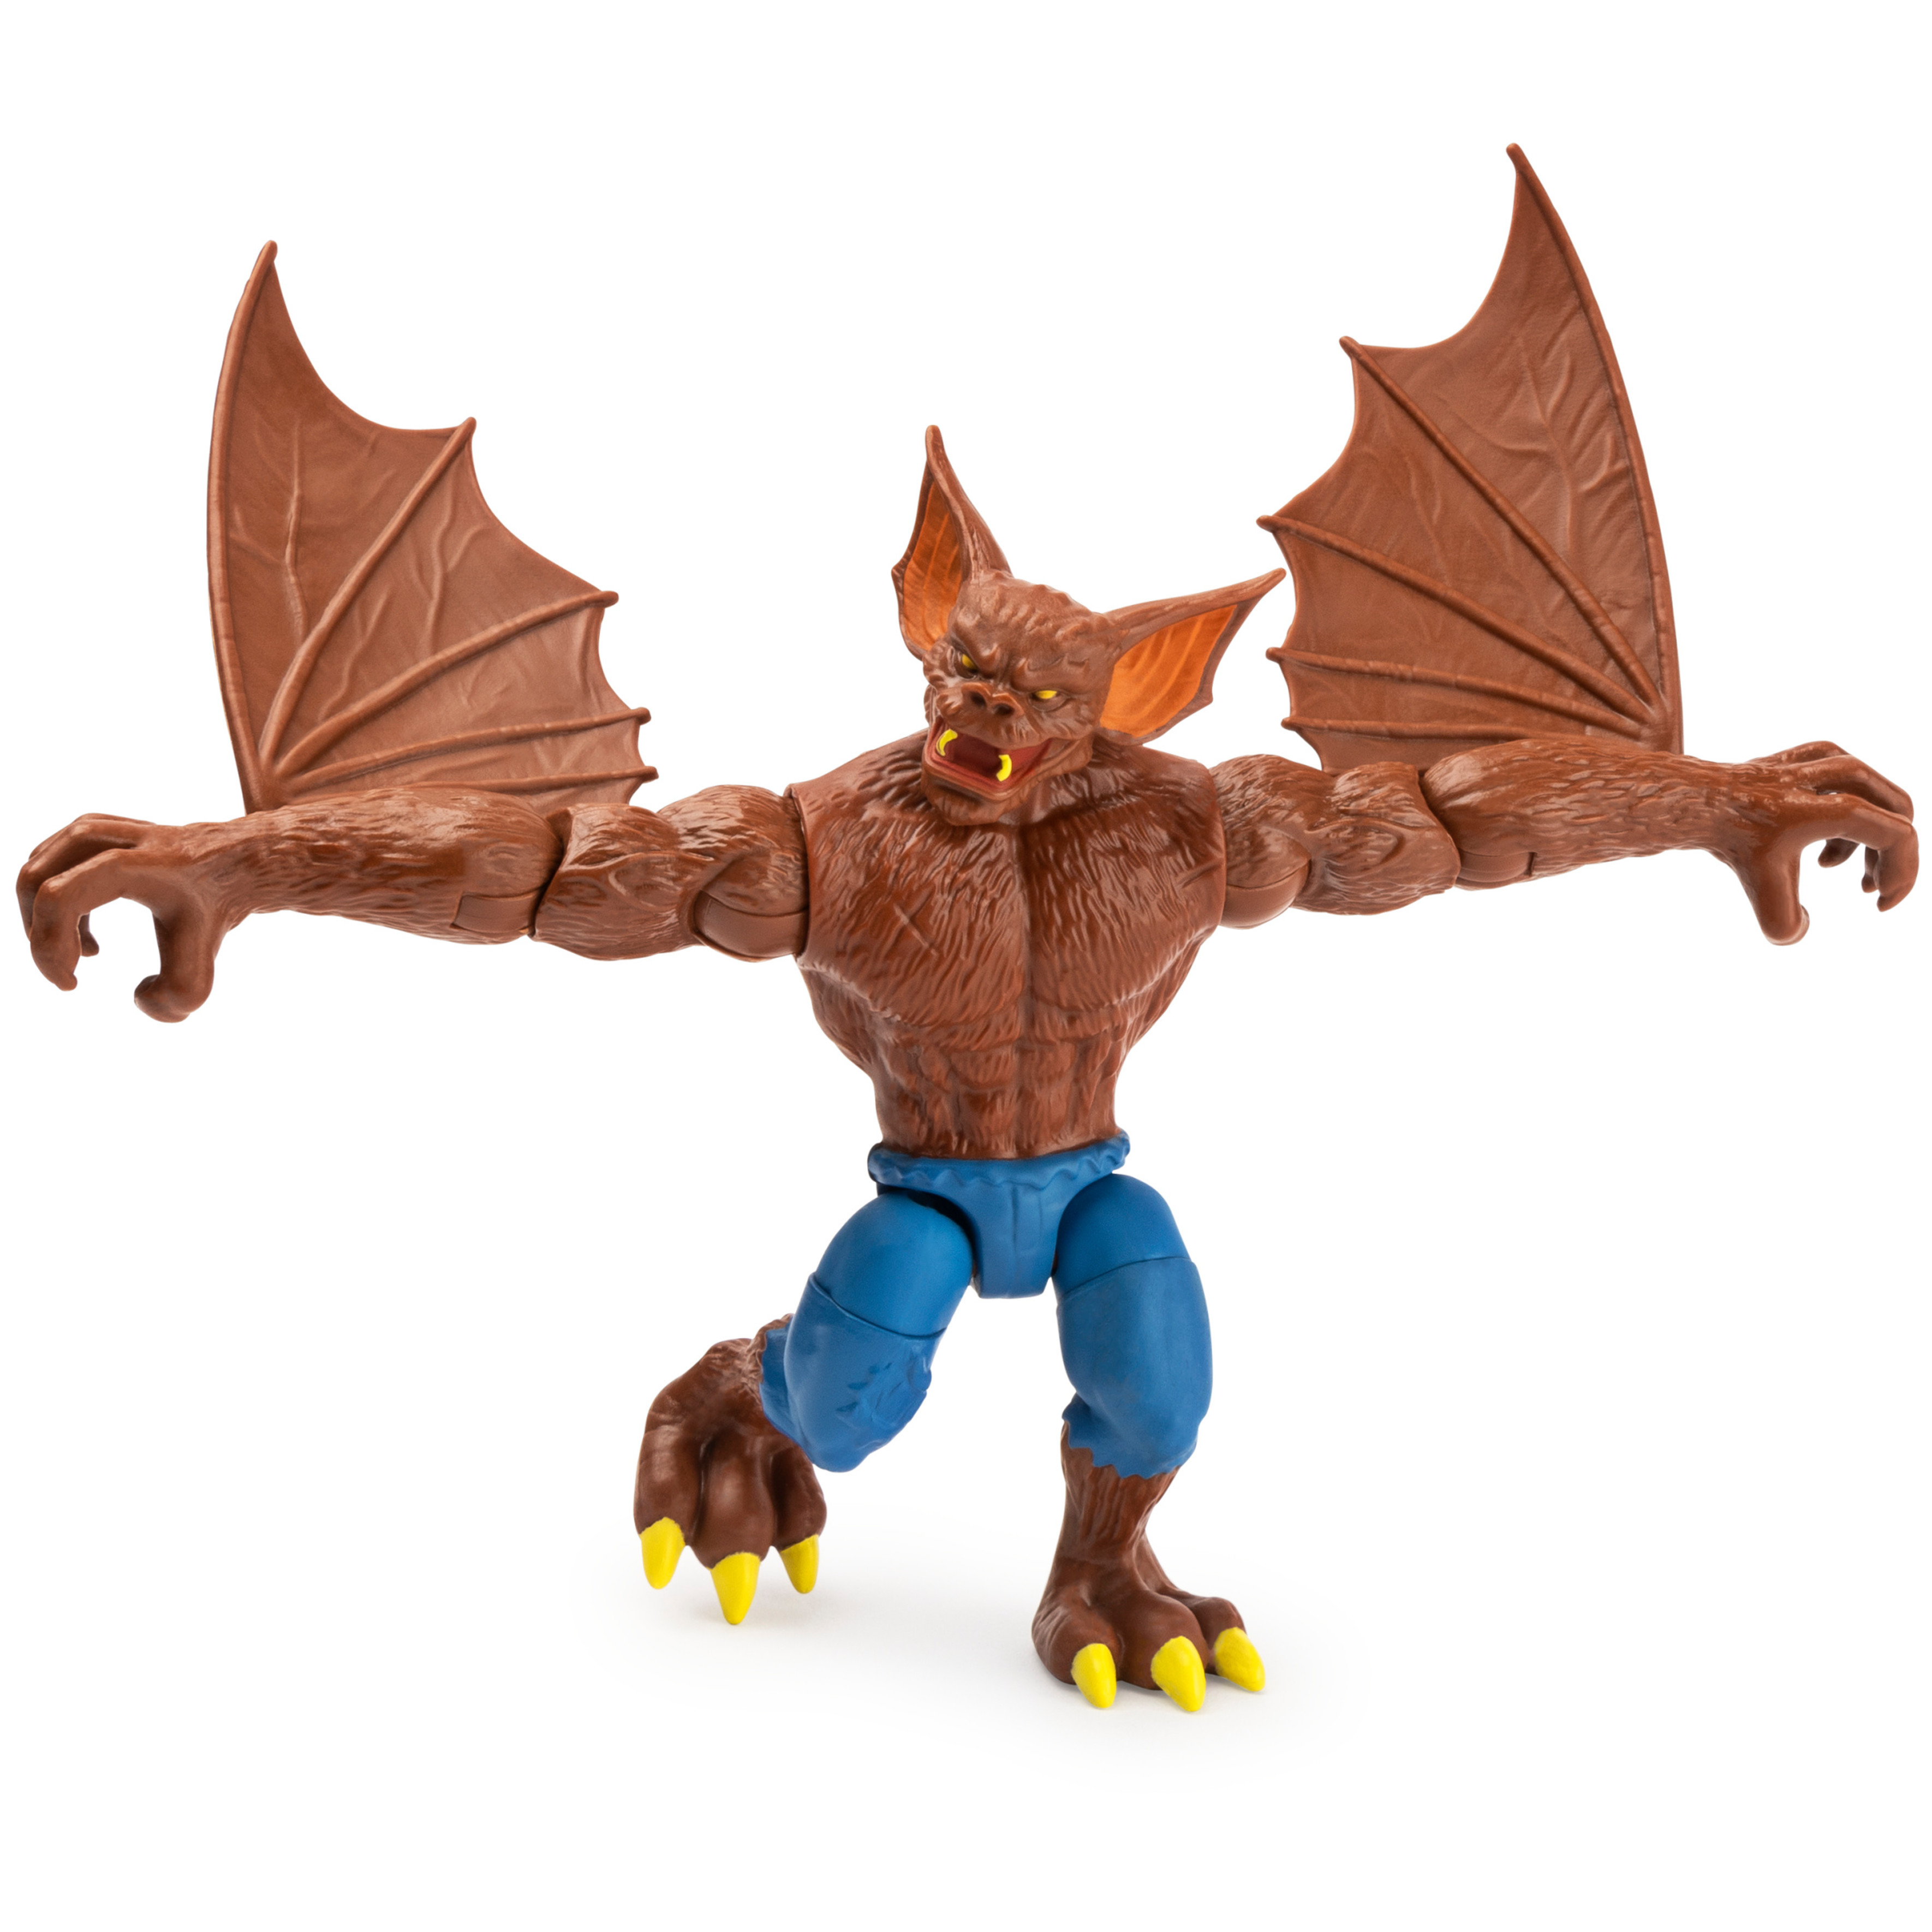 Batman, 4-inch Man-Bat Action Figure with 3 Mystery Accessories, Mission 4 - image 4 of 7